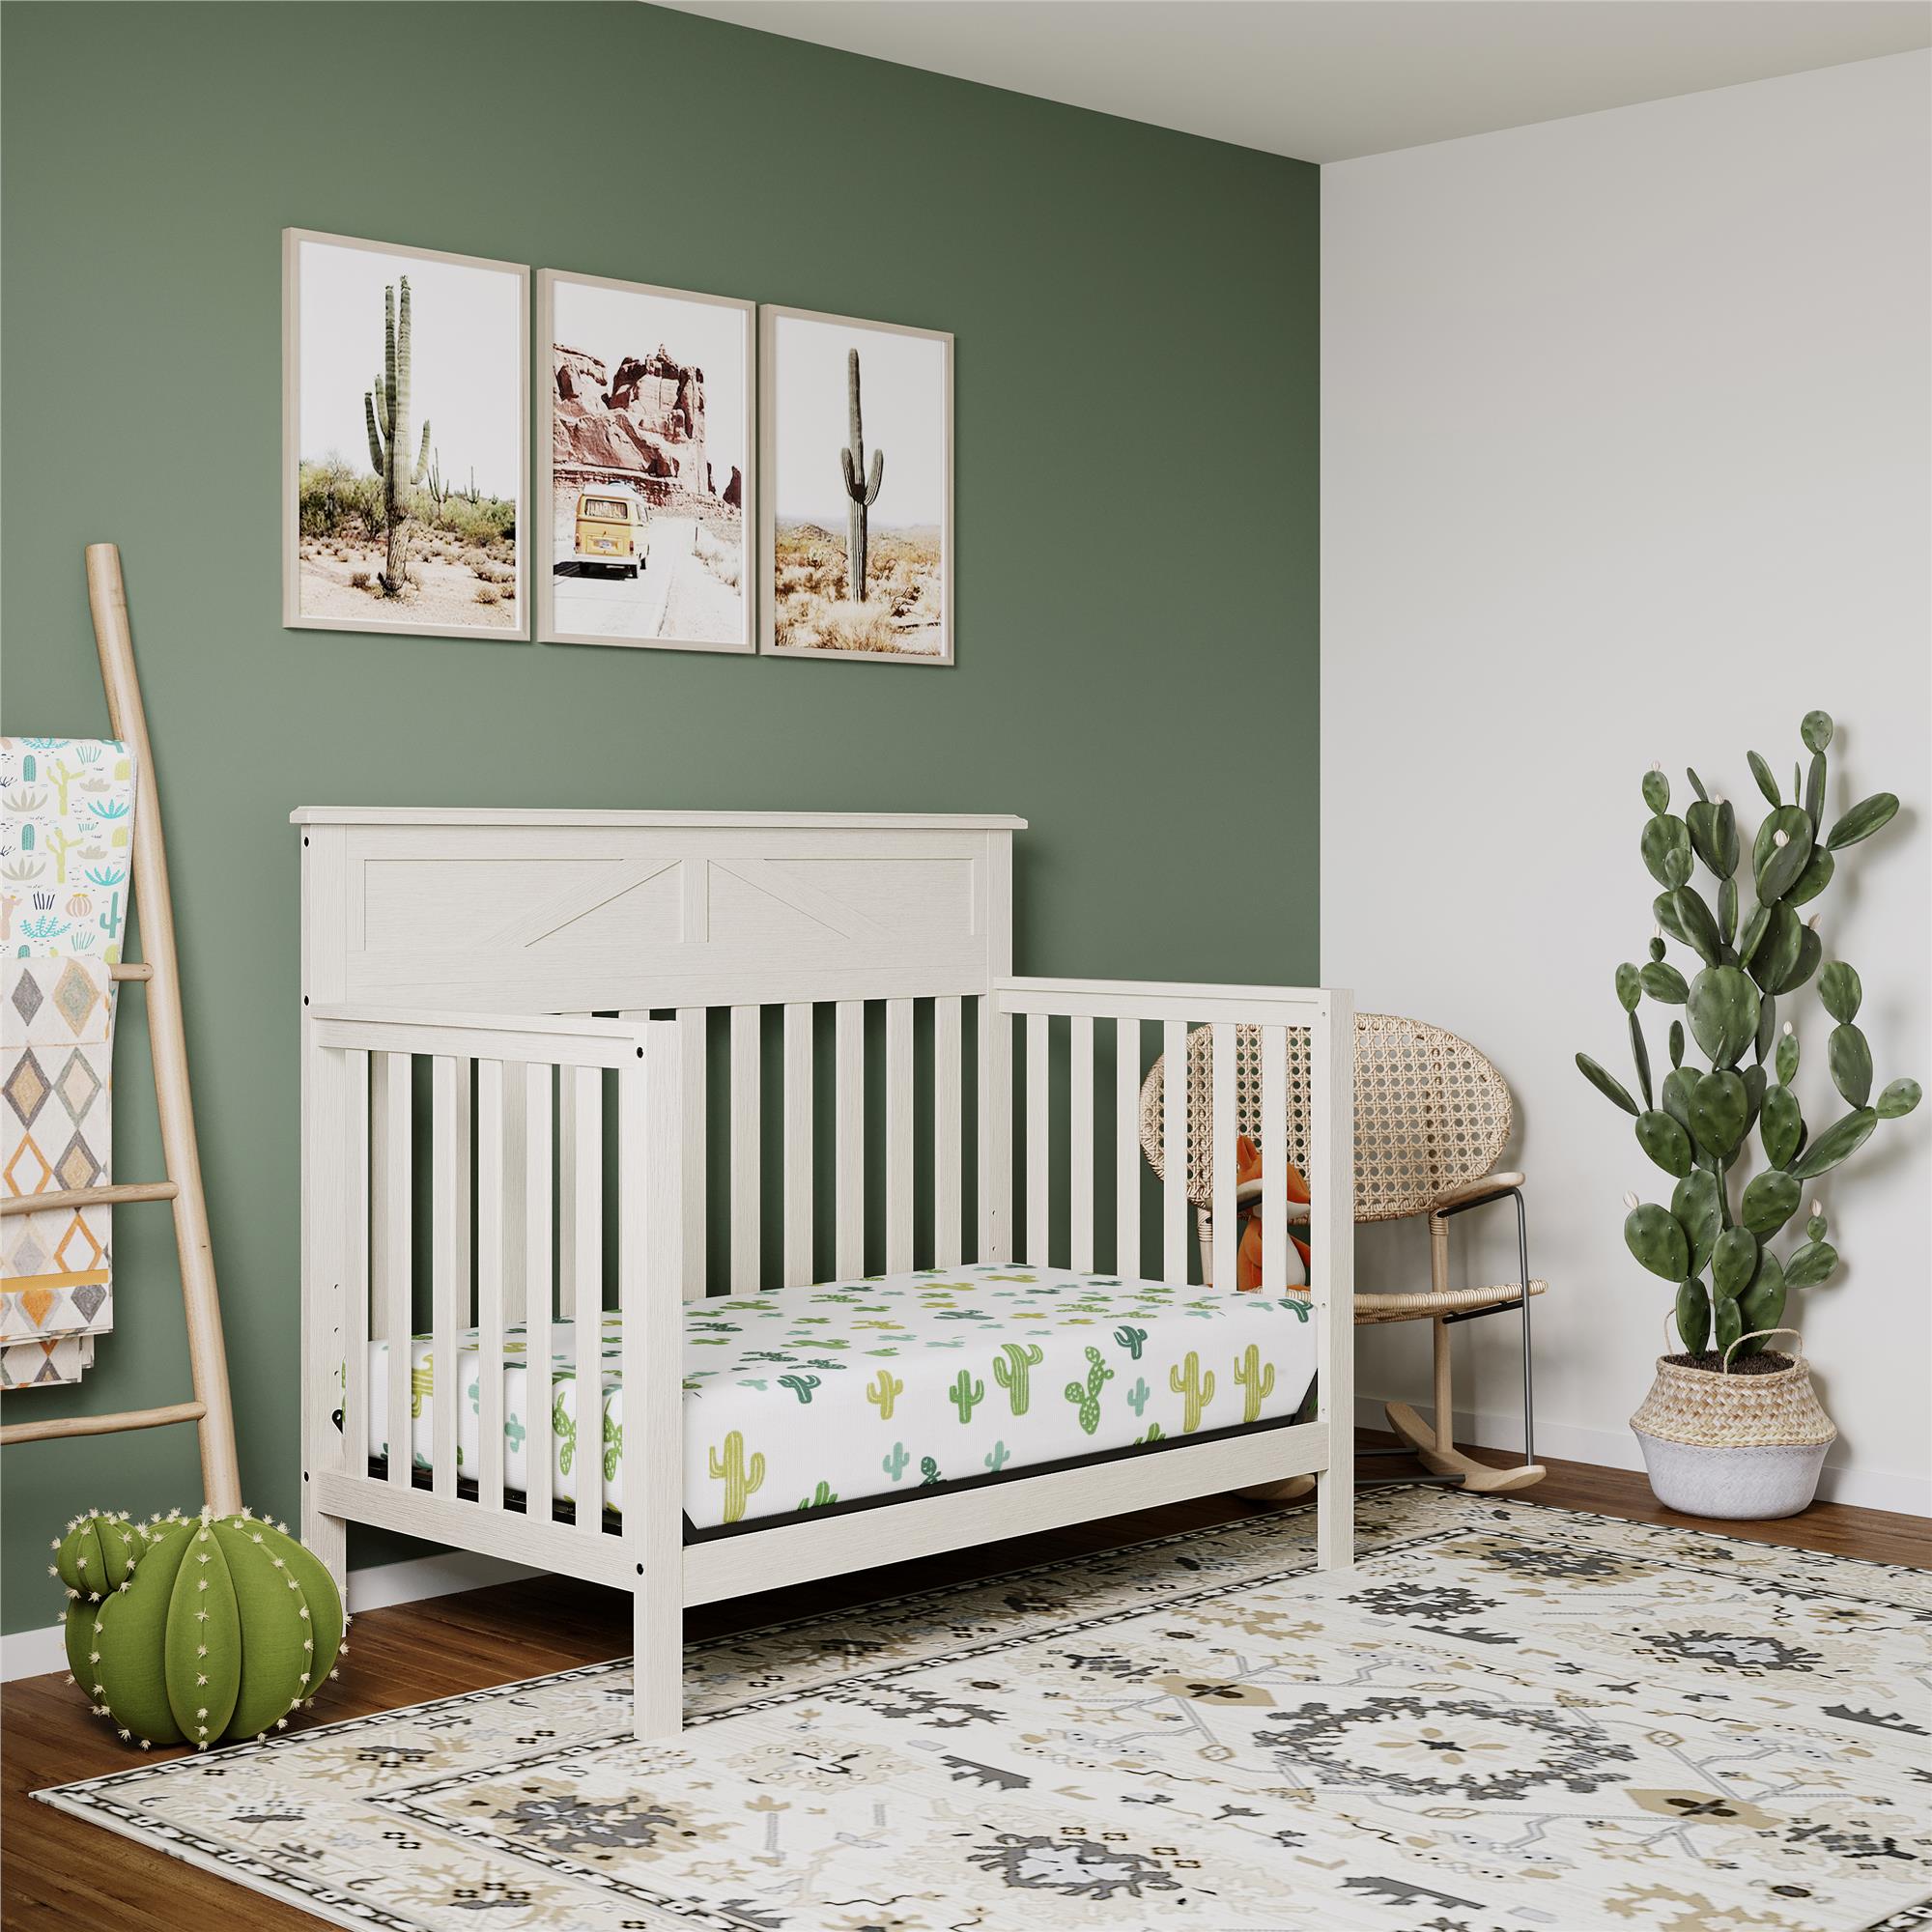 Baby Relax Hathaway 5-in-1 Convertible Wood Crib, Rustic White - image 3 of 17